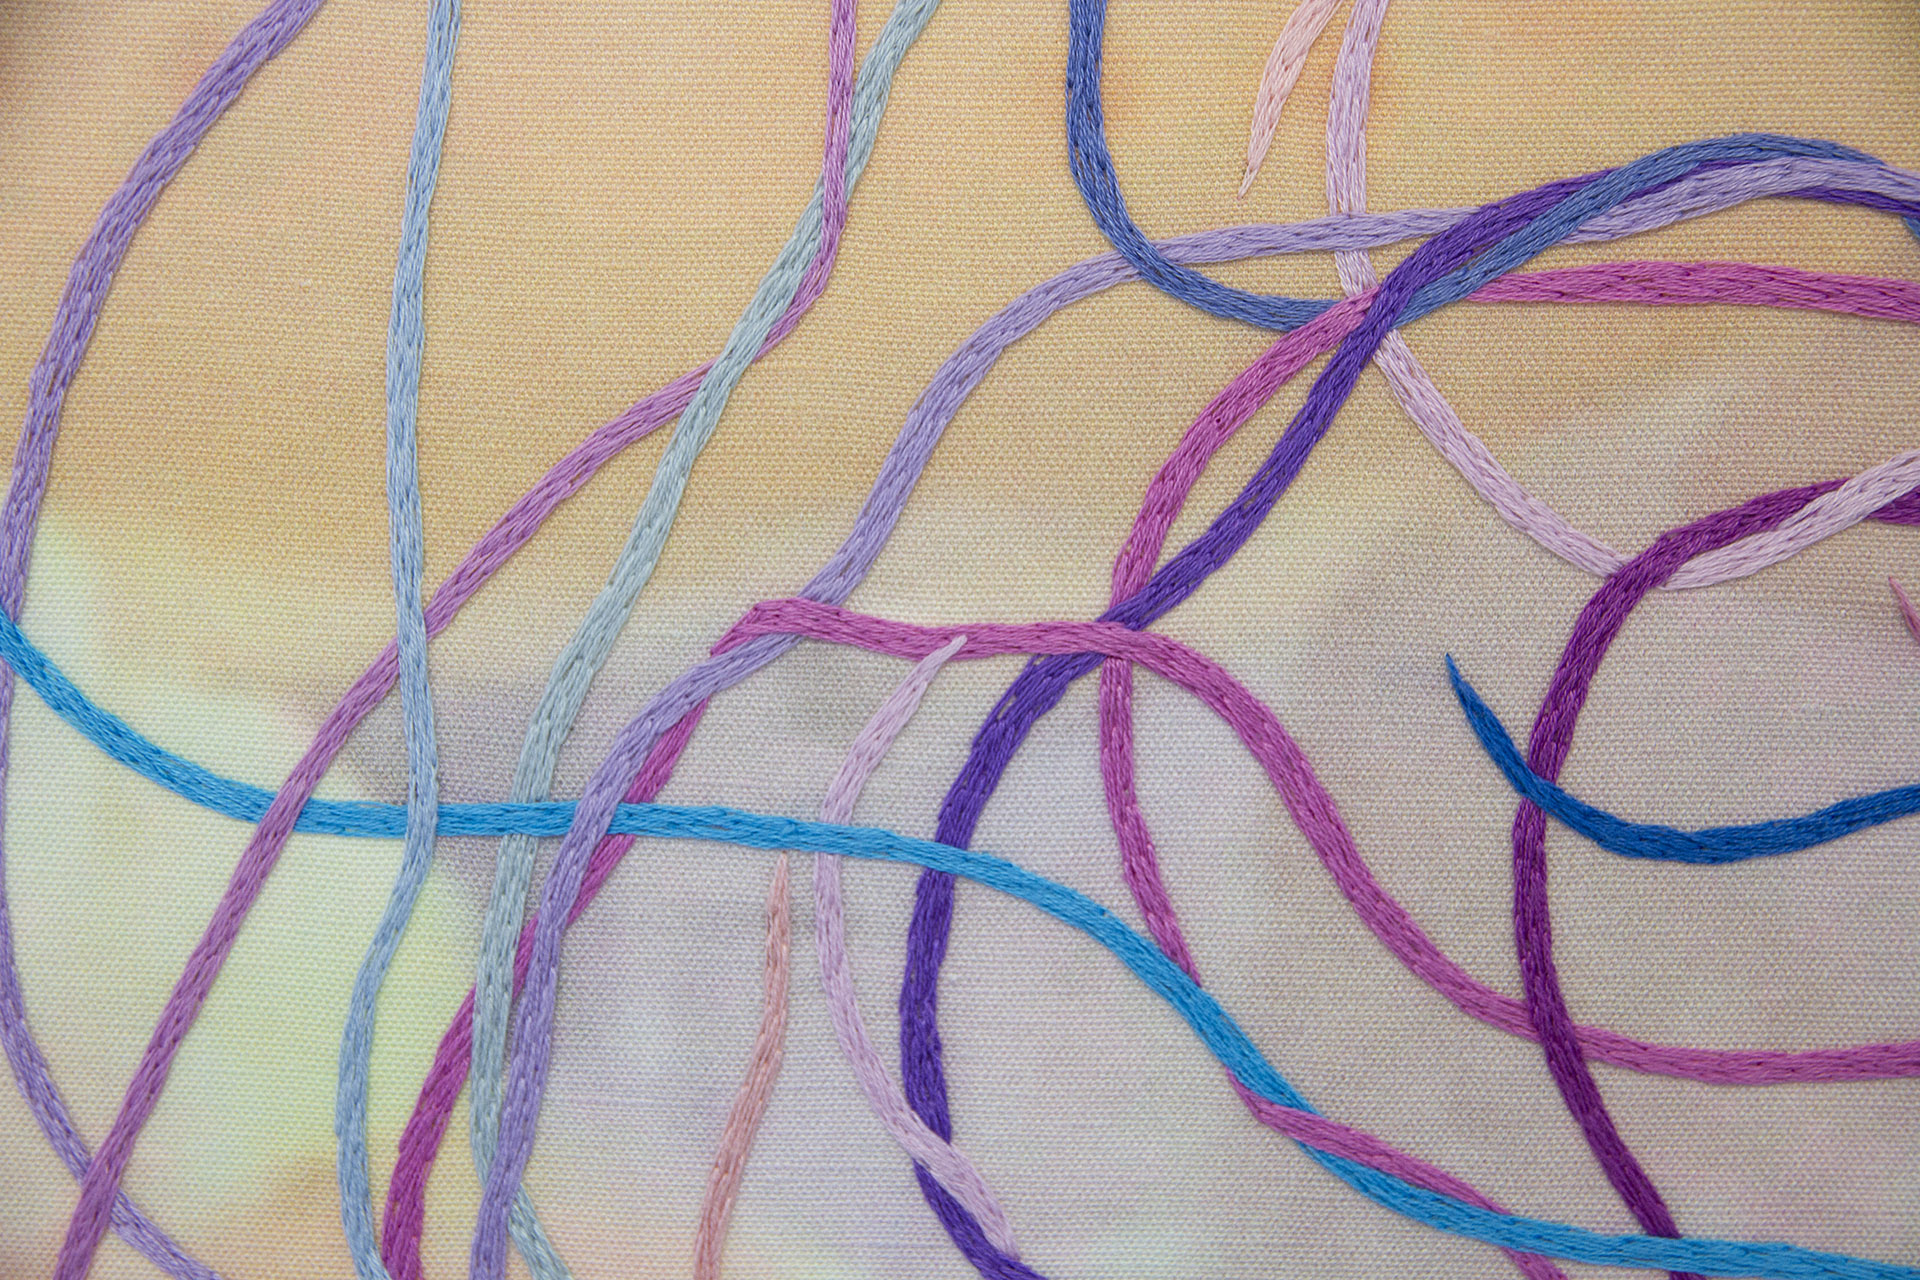 Knot Theory, embroidery detail, 2021